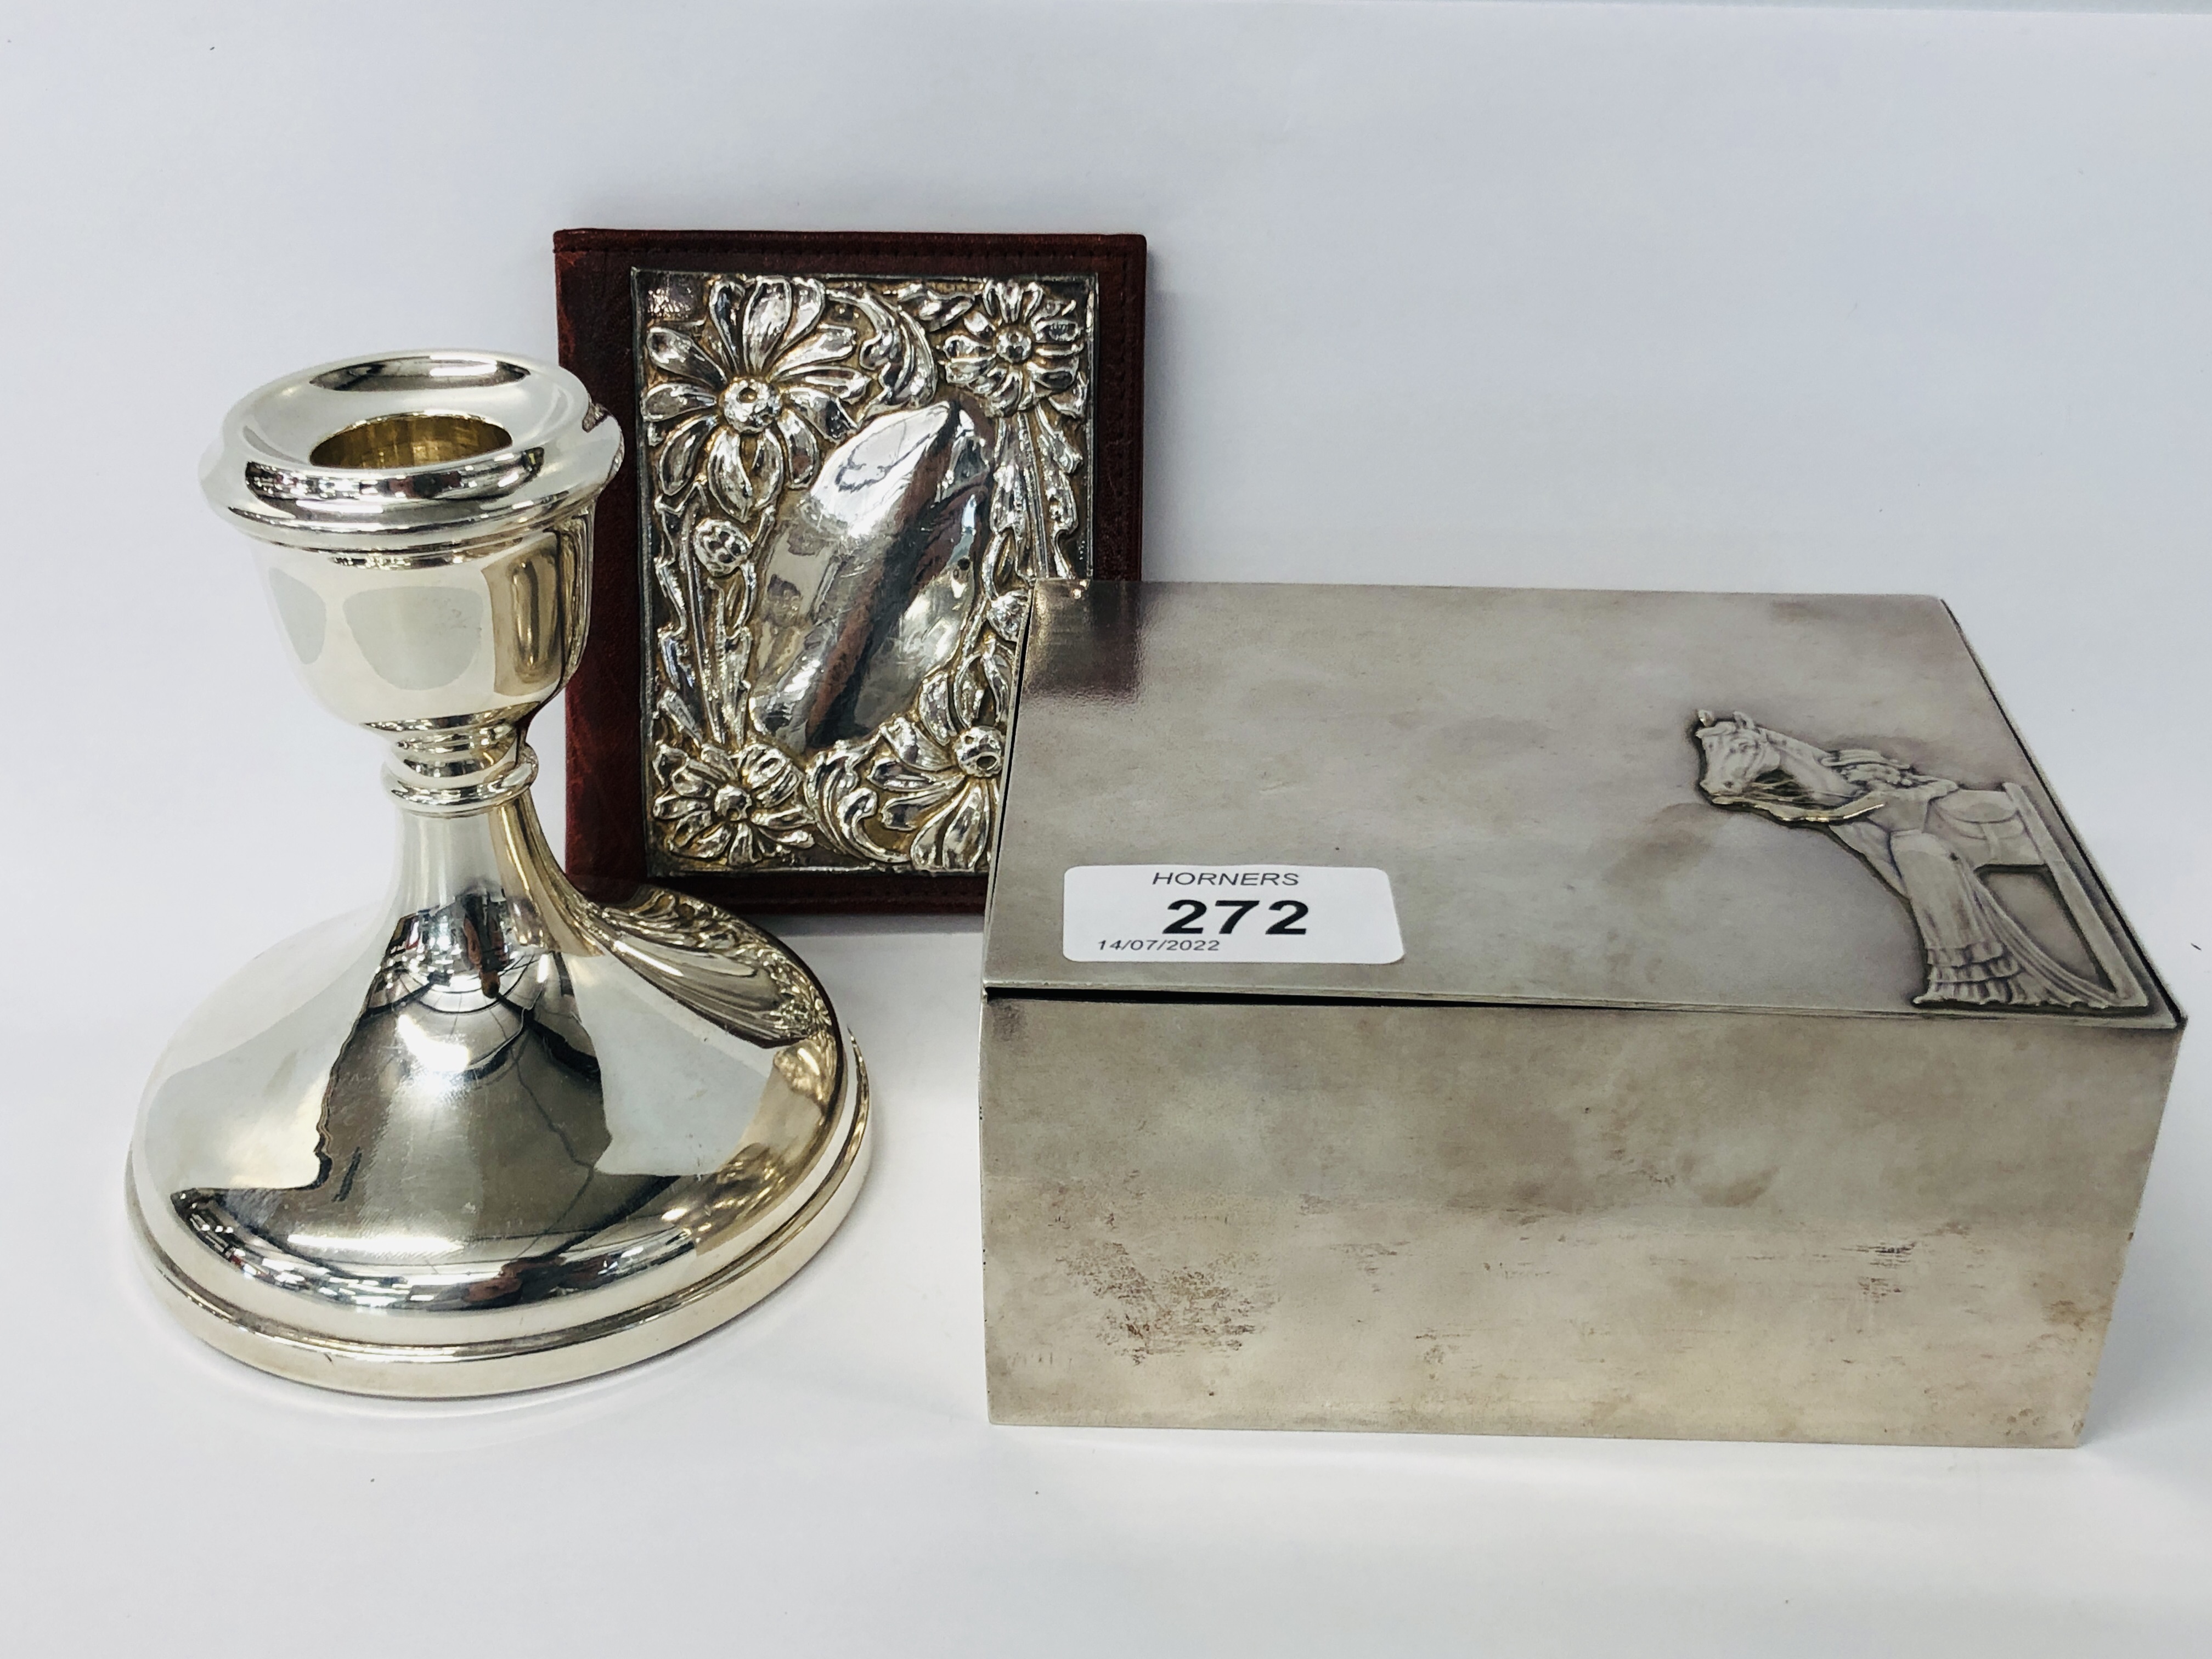 SILVER CANDLESTICK, SILVER EMBOSSED PURSE + AN ART NOUVEAU STYLE WHITE METAL BOX.